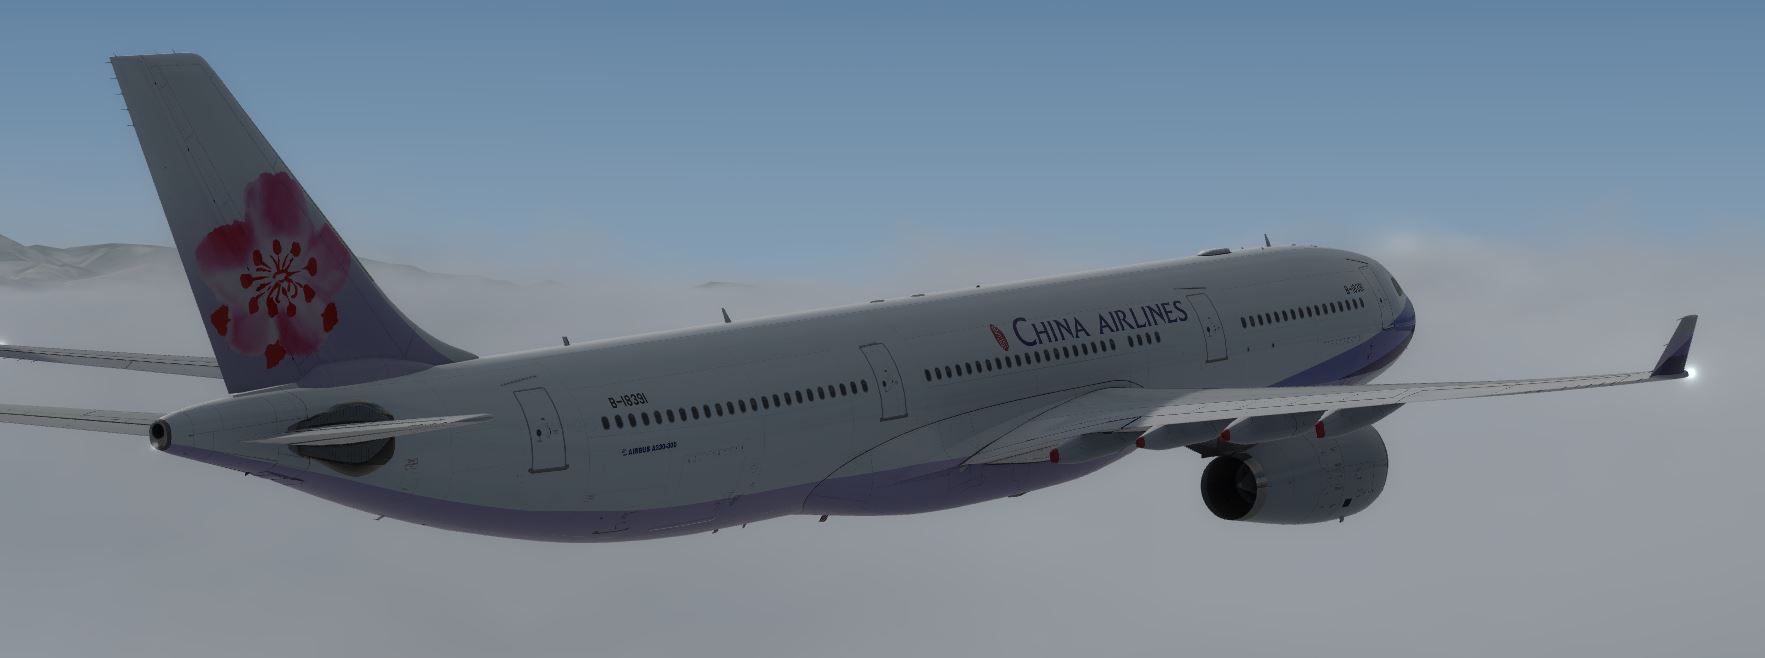 AS A330 ChinaAirline-356 